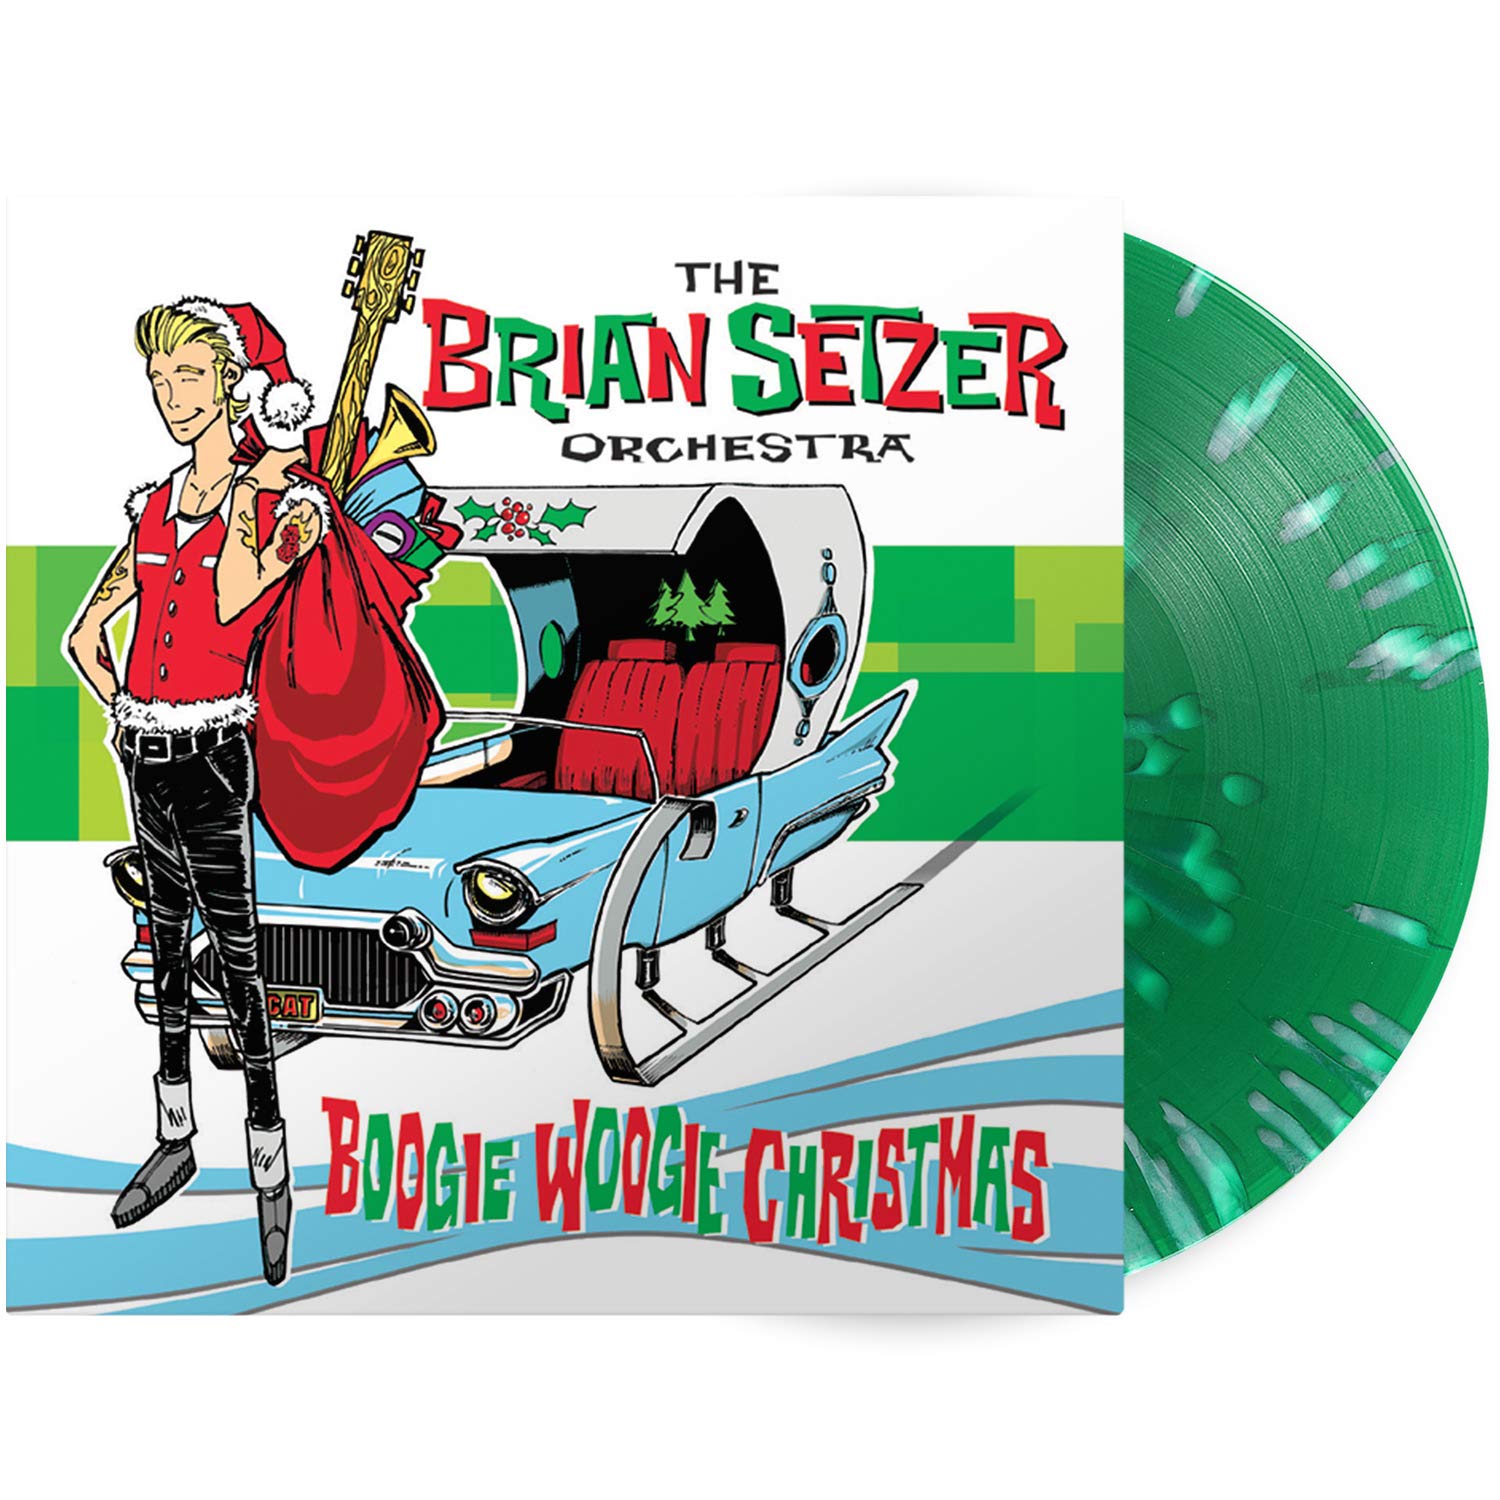 Brian-Setzer-Orchestra-The---Boogie-Woogie-Christmas-LP